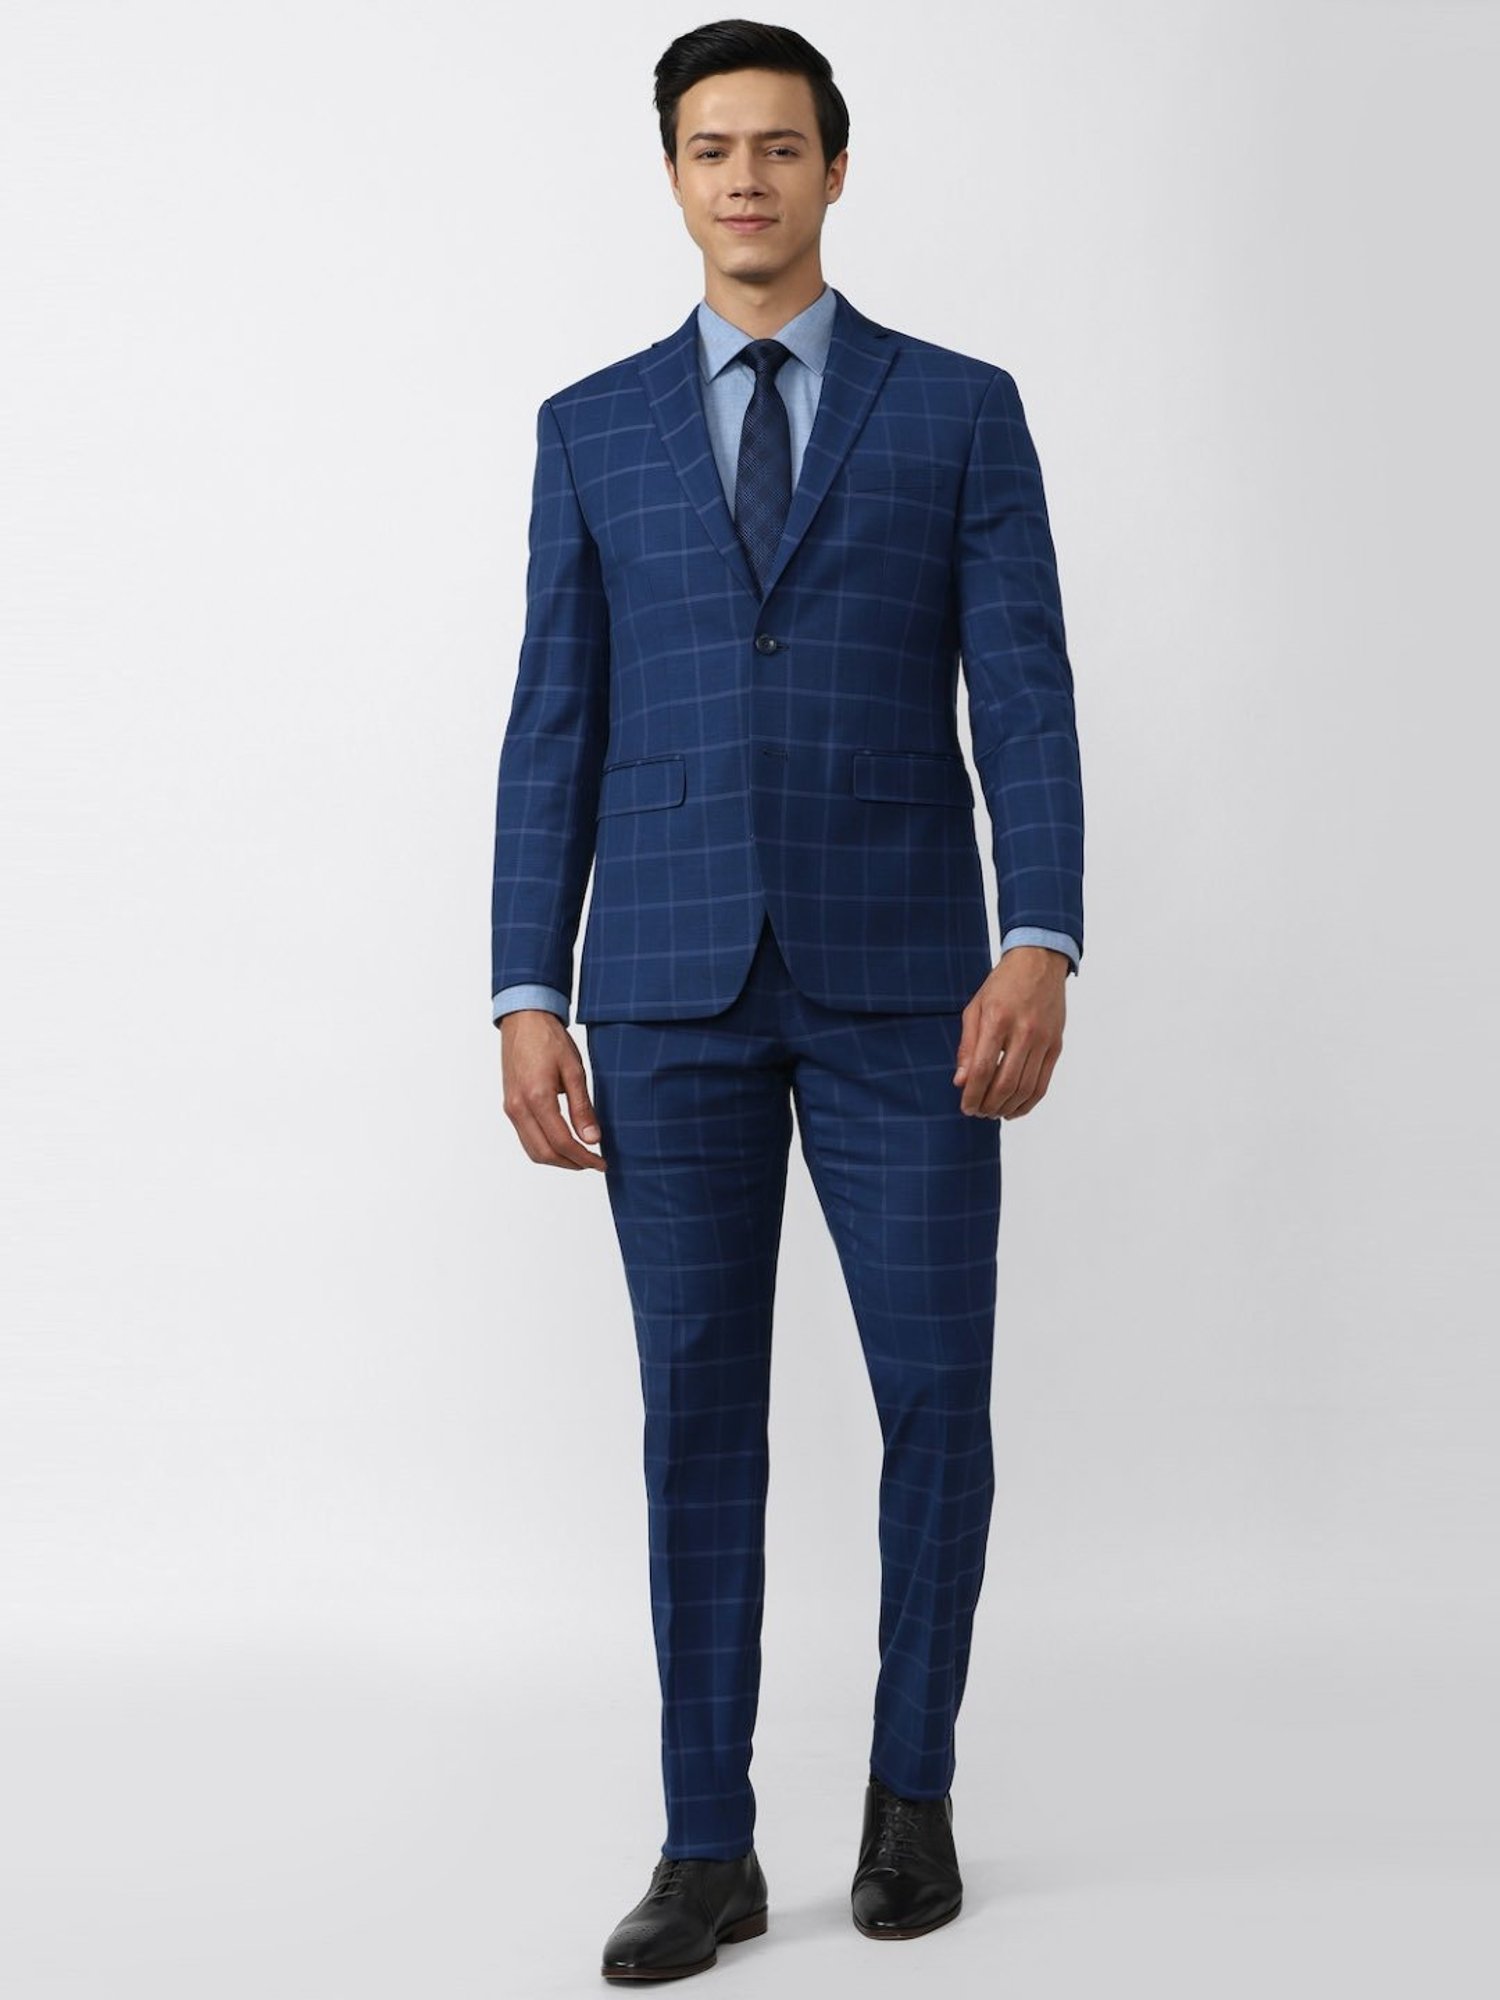 14 Different Suit Colors for Men You can Wear